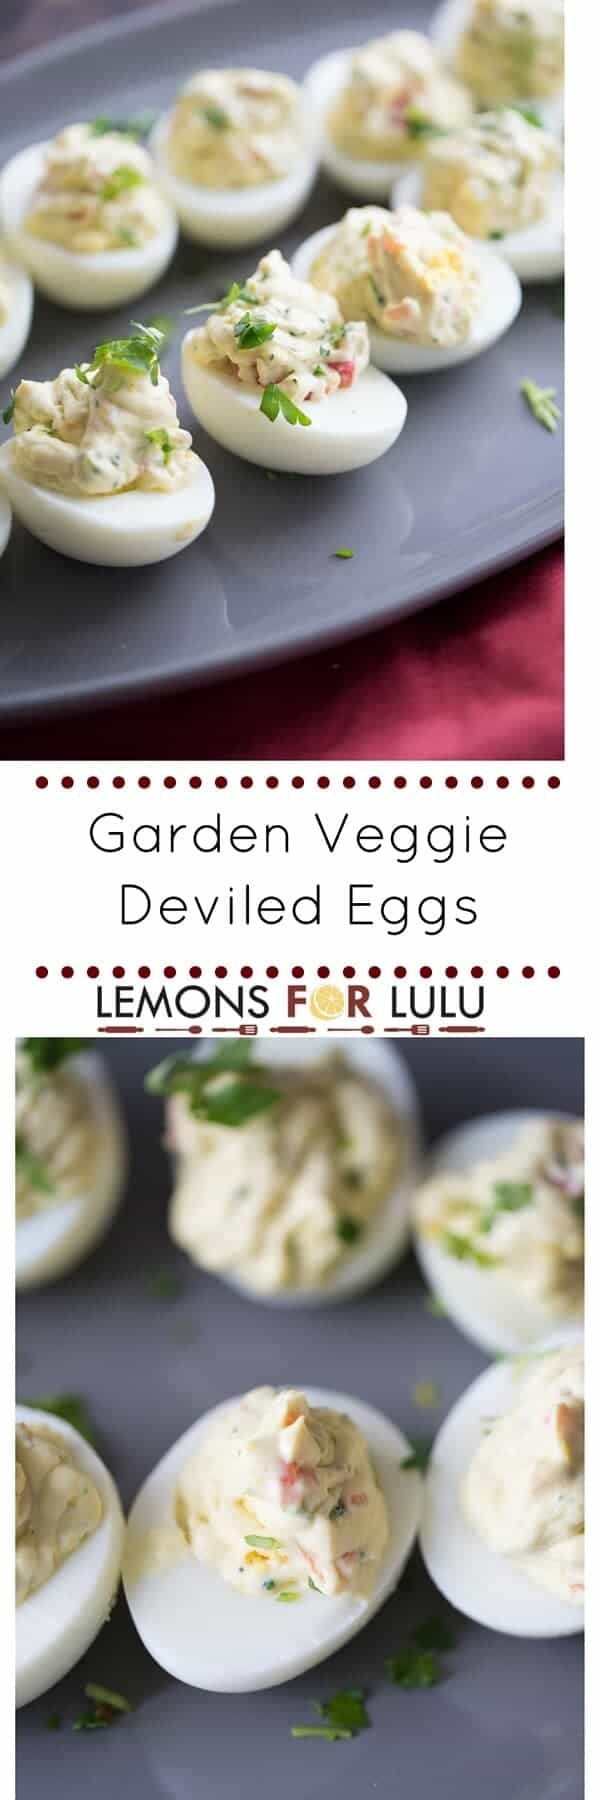 Nothing beats a good deviled egg recipe except for a simple deviled egg recipe and this is both! Fresh garden veggies and ranch seasoning make these little eggs taste fantastic!